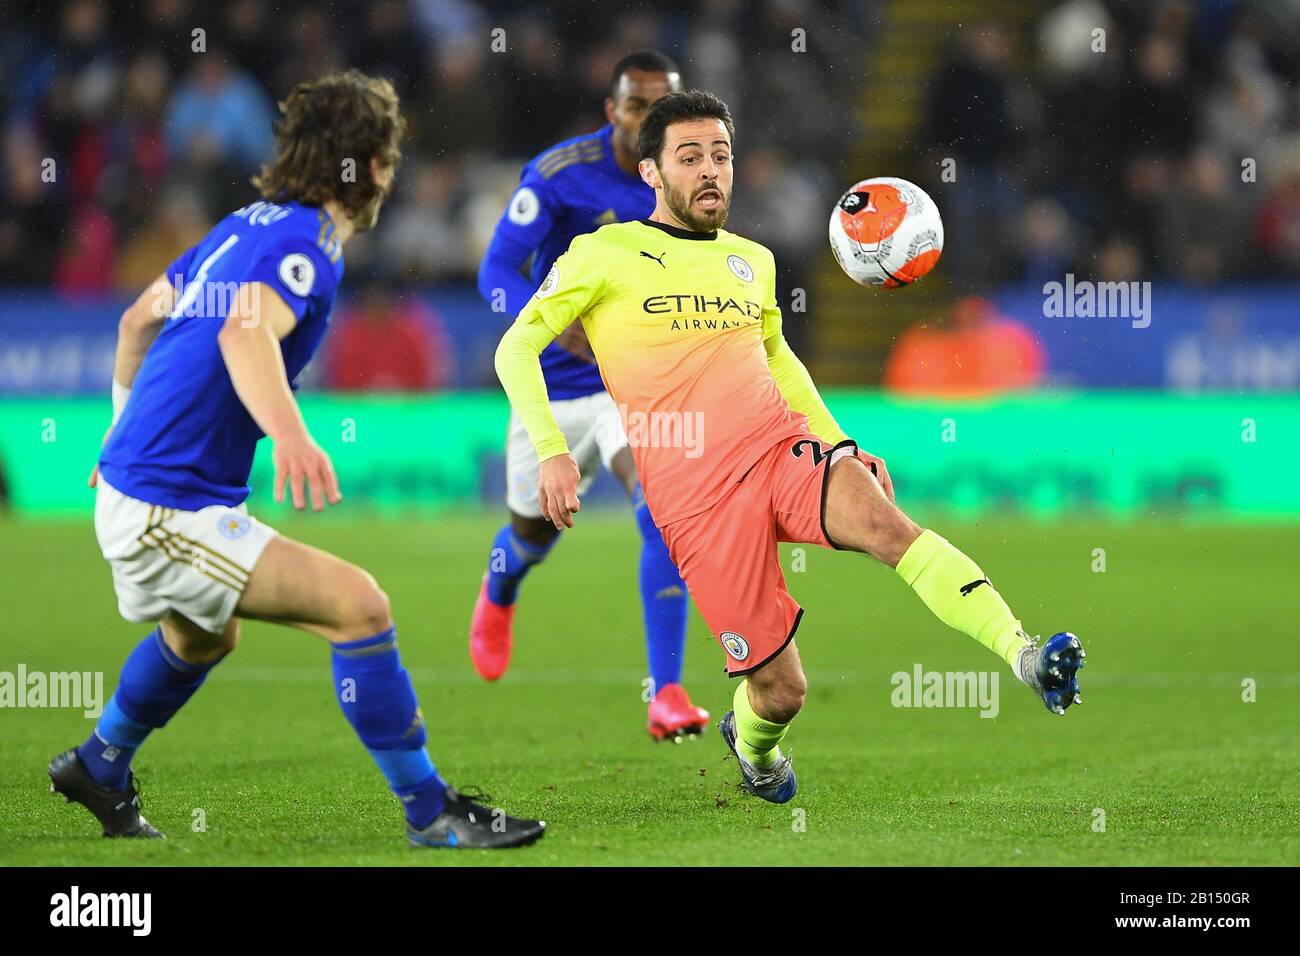 LEICESTER, ENGLAND - FEBRUARY 22ND Bernardo Silva (20) of Manchester City during the Premier League match between Leicester City and Manchester City at the King Power Stadium, Leicester on Saturday 22nd February 2020. (Credit: Jon Hobley | MI News) Photograph may only be used for newspaper and/or magazine editorial purposes, license required for commercial use Credit: MI News & Sport /Alamy Live News Stock Photo